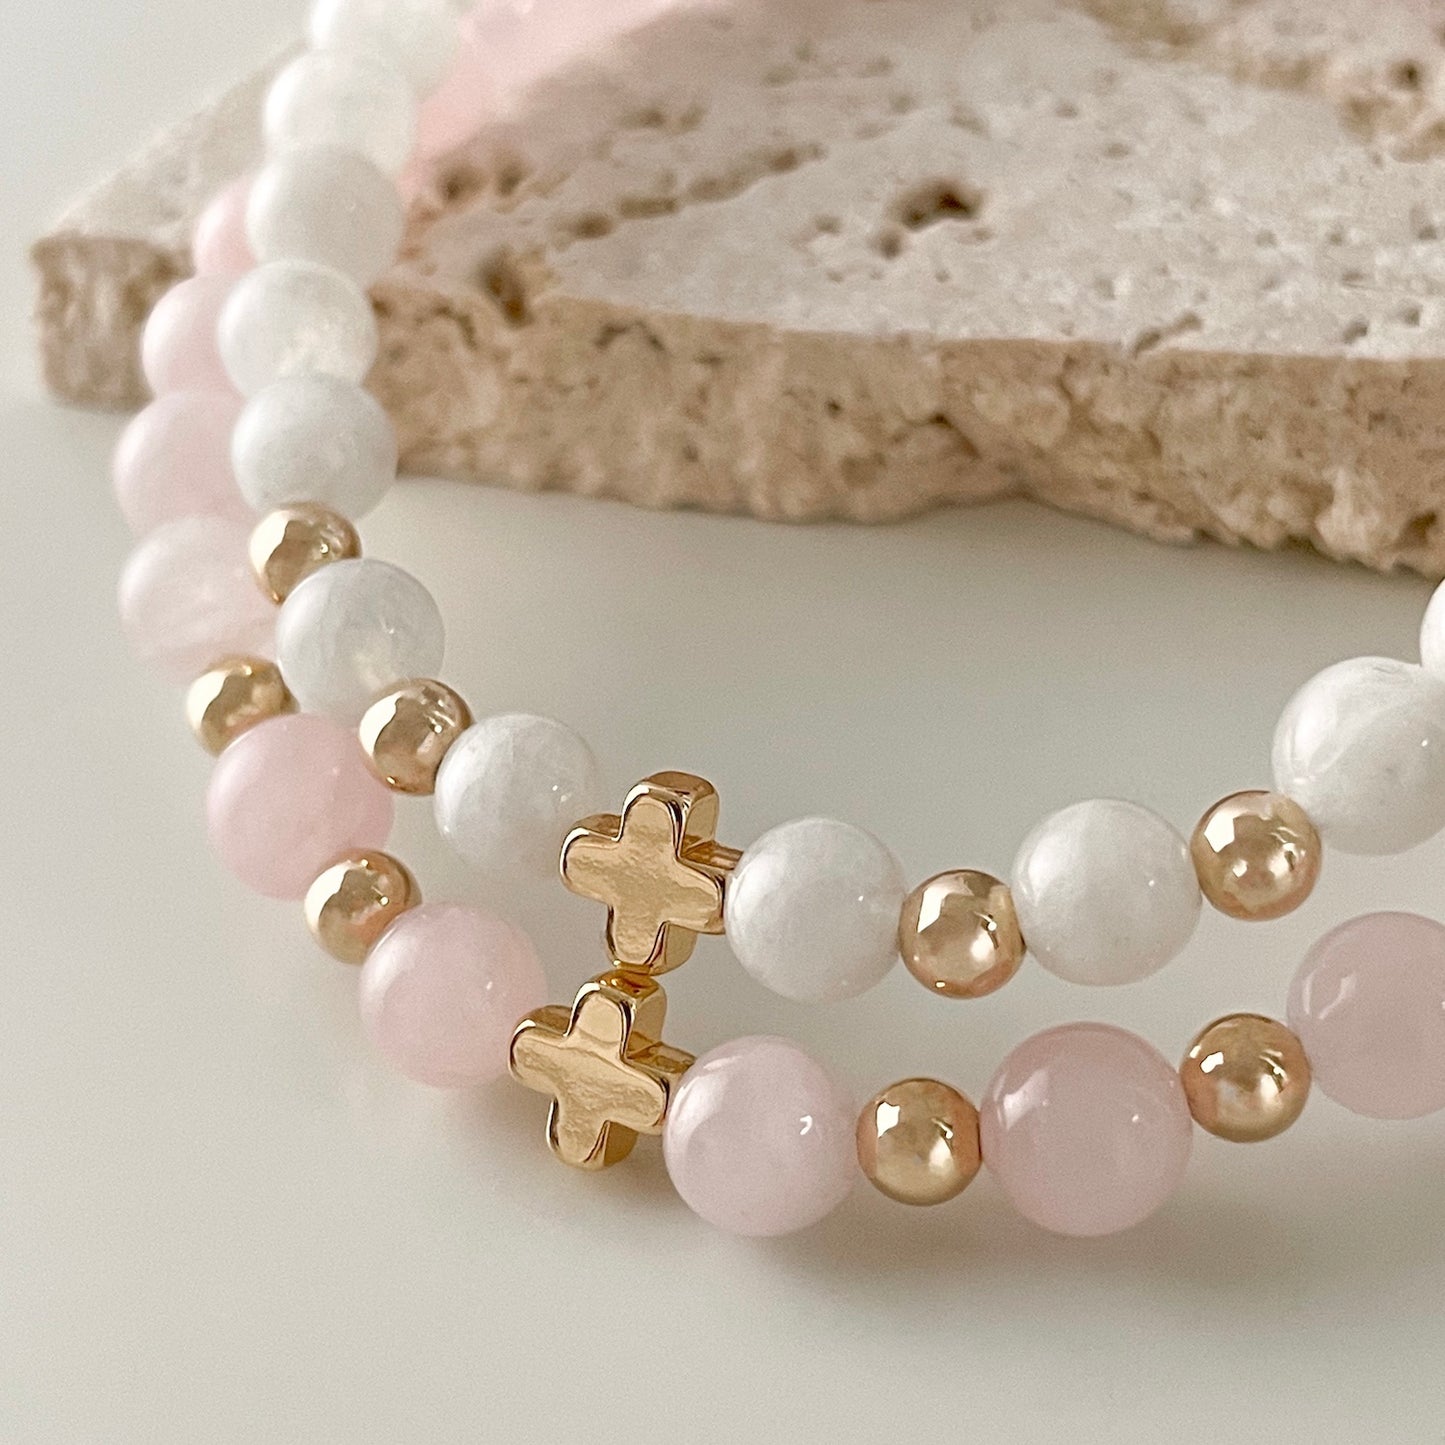 Stacked Rose Quartz and White Moonstone gemstone bracelet with 14k gold metal accent handmade crystal jewellery in Australia by Ann Saint James, an Australian crystal jewellery brand.